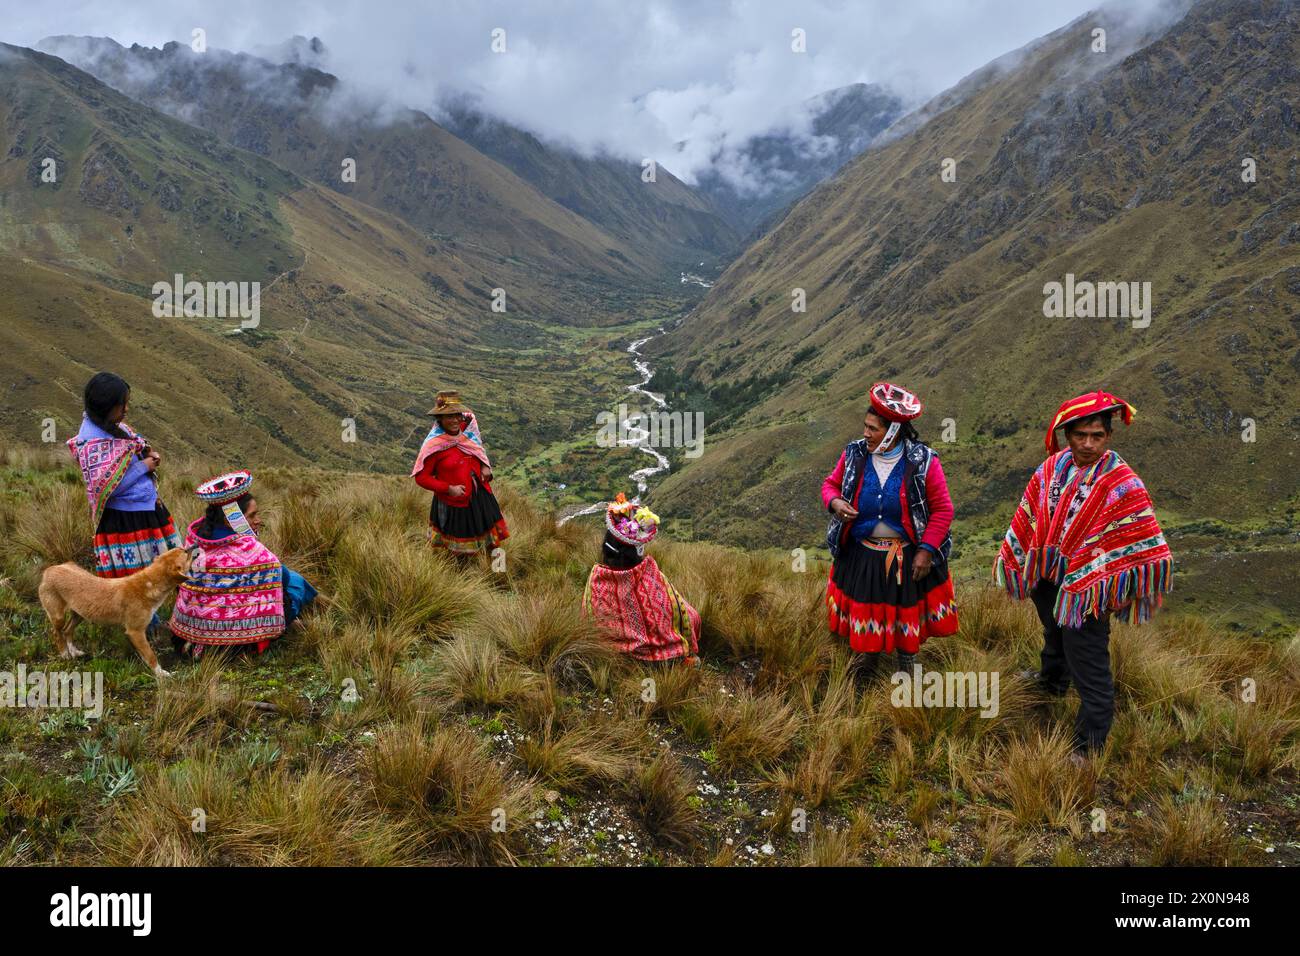 Peru, province of Cuzco, the Sacred Valley of the Incas, communities of the Andes, group of local Quechua peoples in the Vilcanota valley Stock Photo